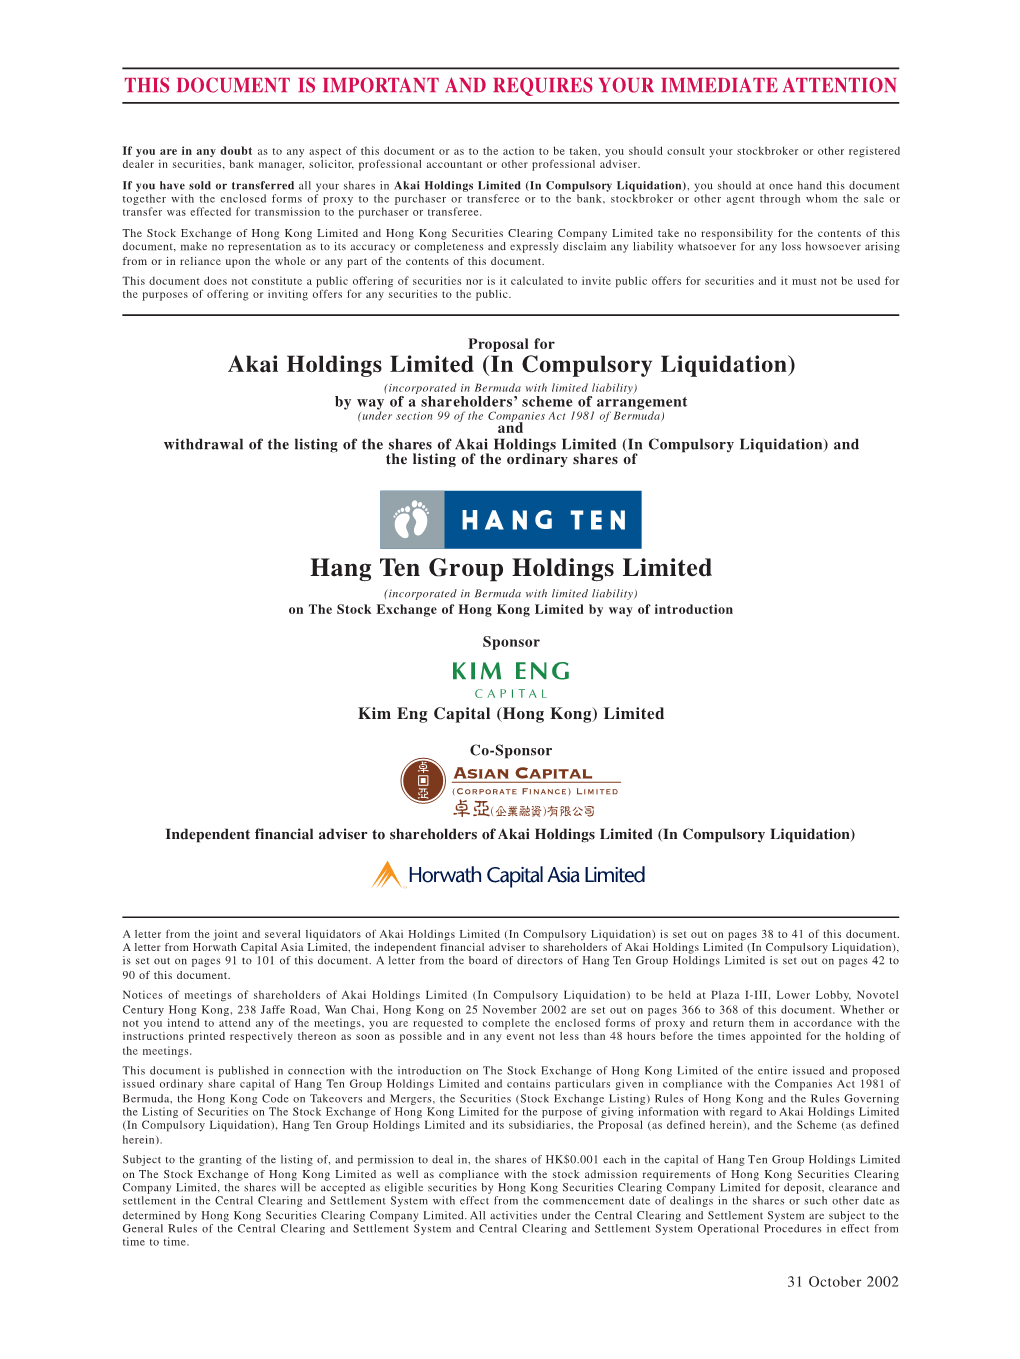 Hang Ten Group Holdings Limited (Incorporated in Bermuda with Limited Liability) on the Stock Exchange of Hong Kong Limited by Way of Introduction